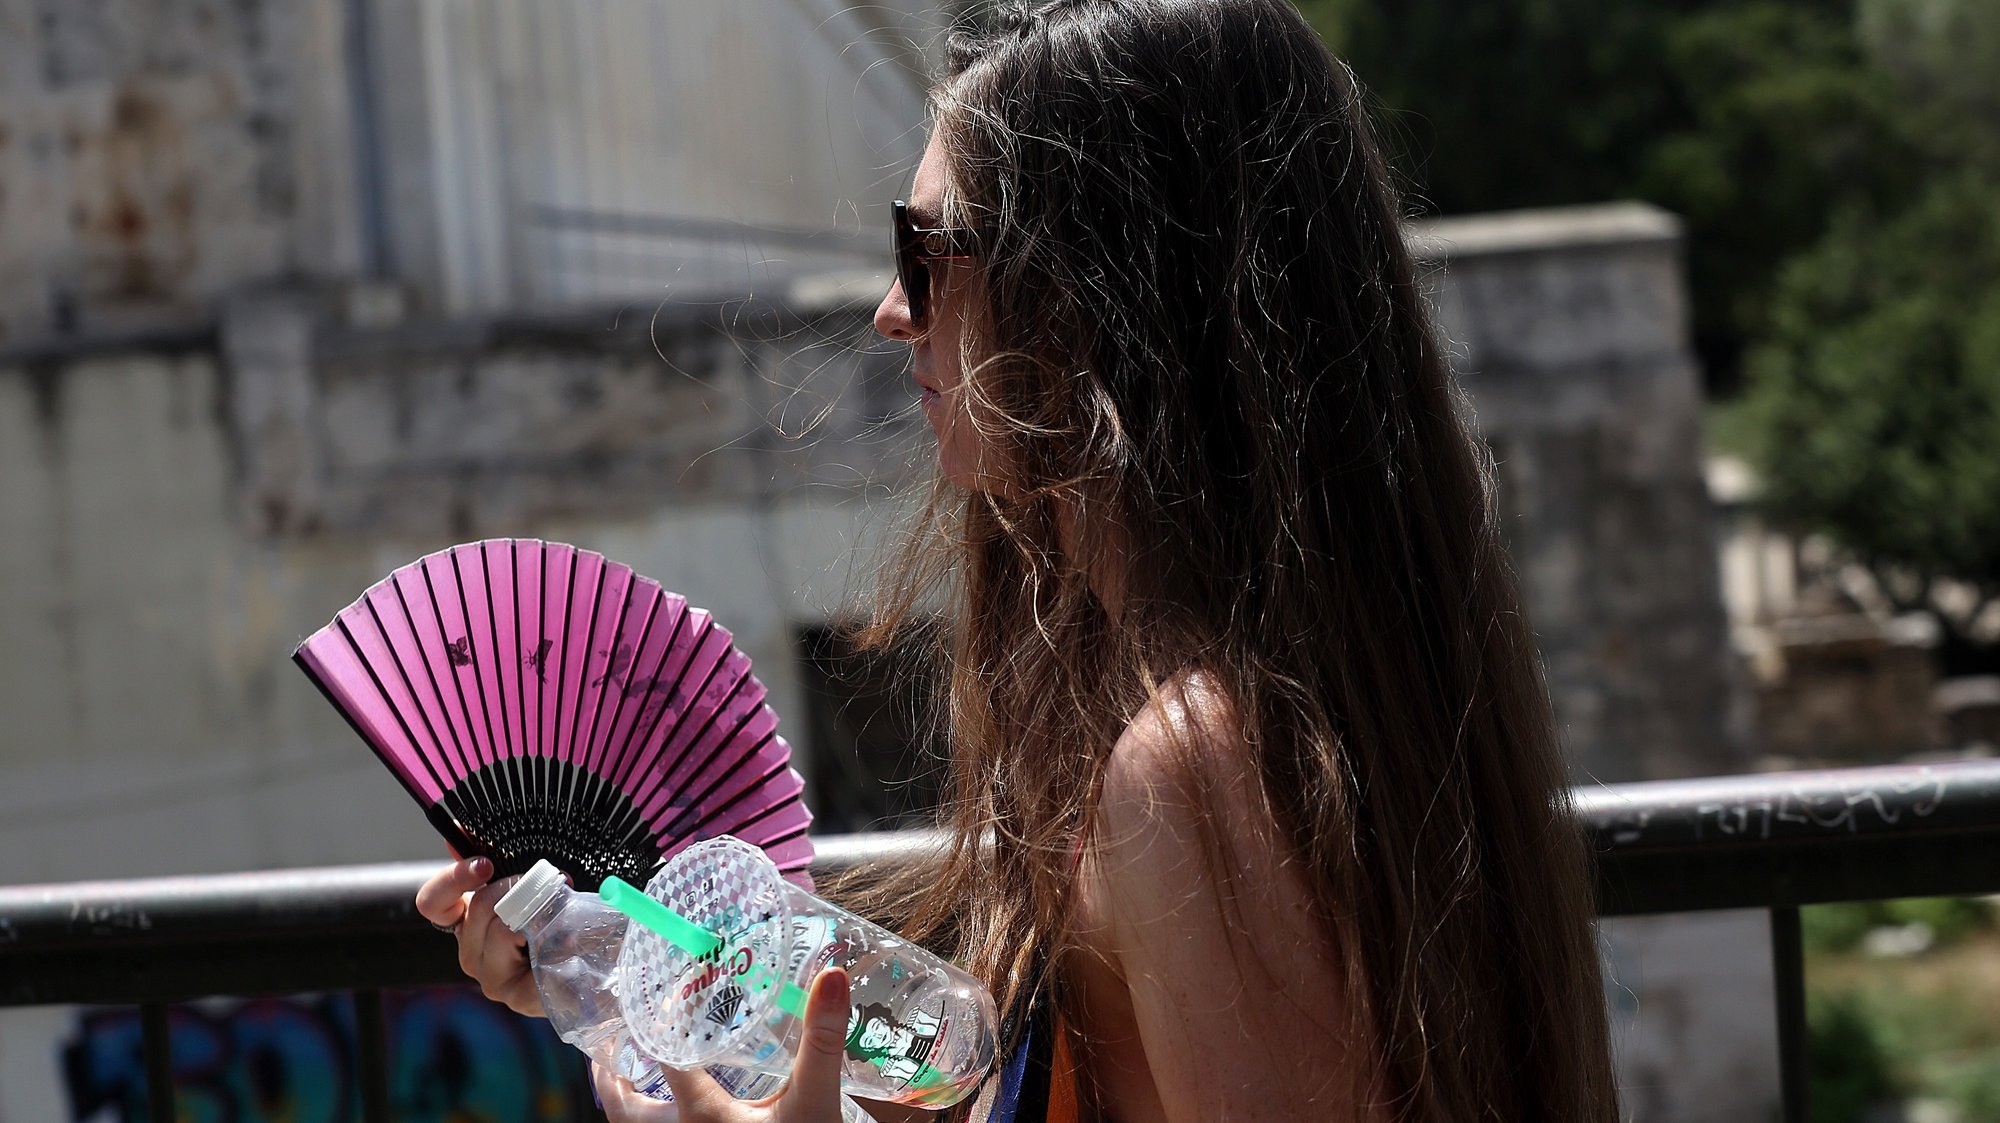 epa09387958 A woman uses a hand fan during a heatwave, in Athens, Greece, 02 August 2021. The long and blisteringly hot heatwave in Greece is expected to peak in the current week, as hot air masses moving up from Africa send temperatures soaring. Maximum temperatures will reach 43-45C on average and rise as high as 46-47C in some localities, while the risk of fires is exceptionally high.  EPA/ORESTIS PANAGIOTOU